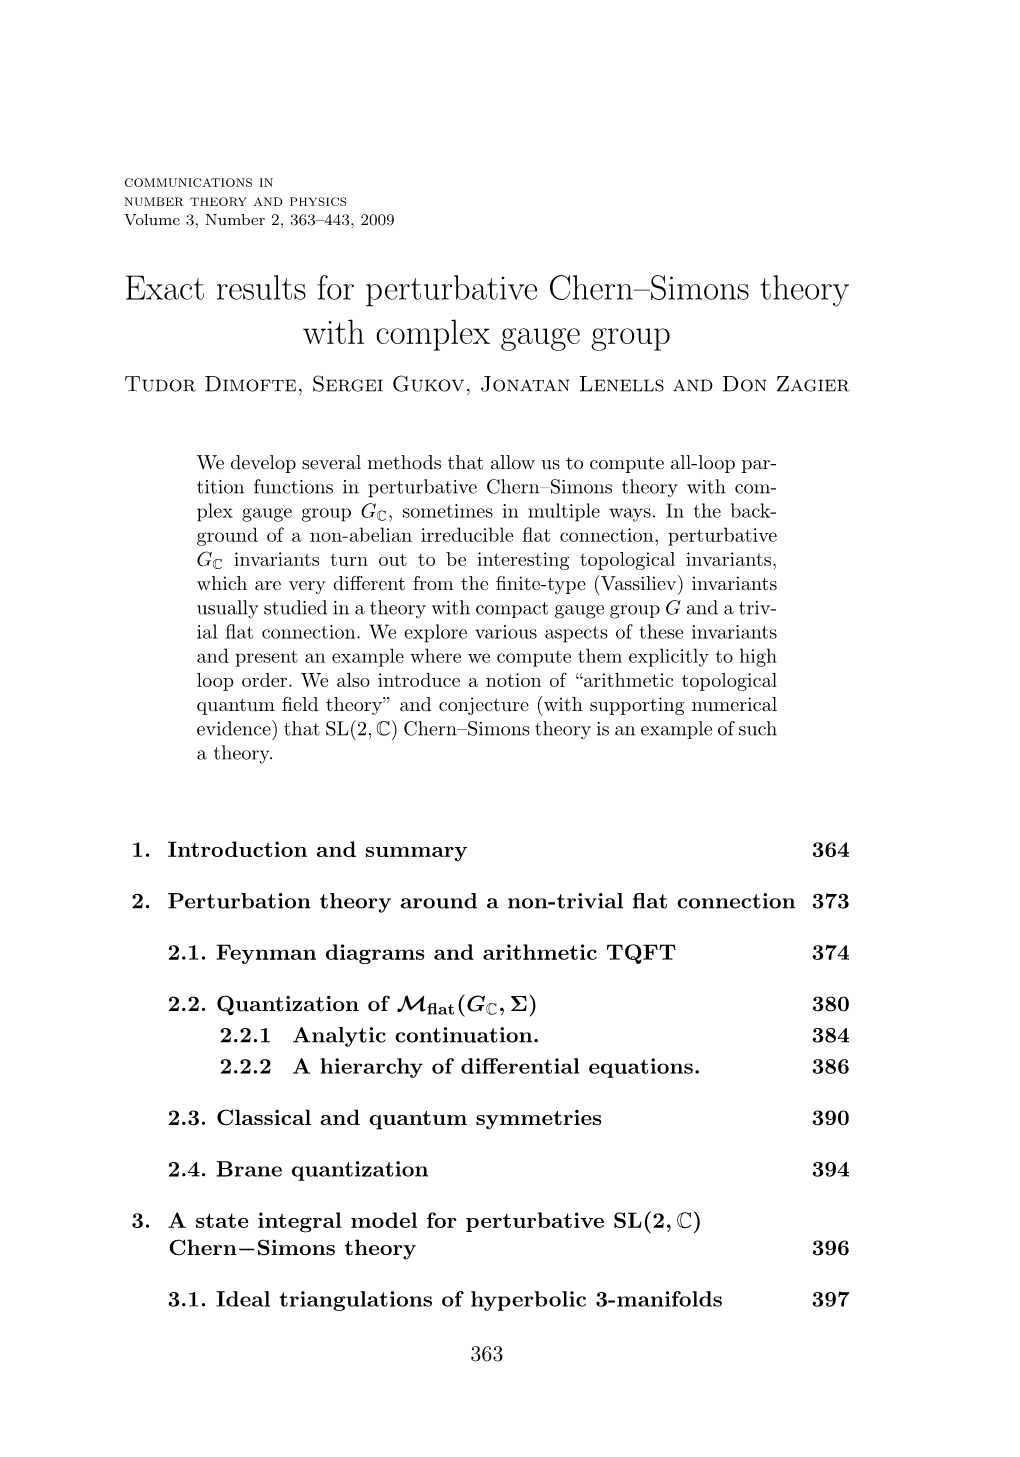 Exact Results for Perturbative Chern–Simons Theory with Complex Gauge Group Tudor Dimofte, Sergei Gukov, Jonatan Lenells and Don Zagier